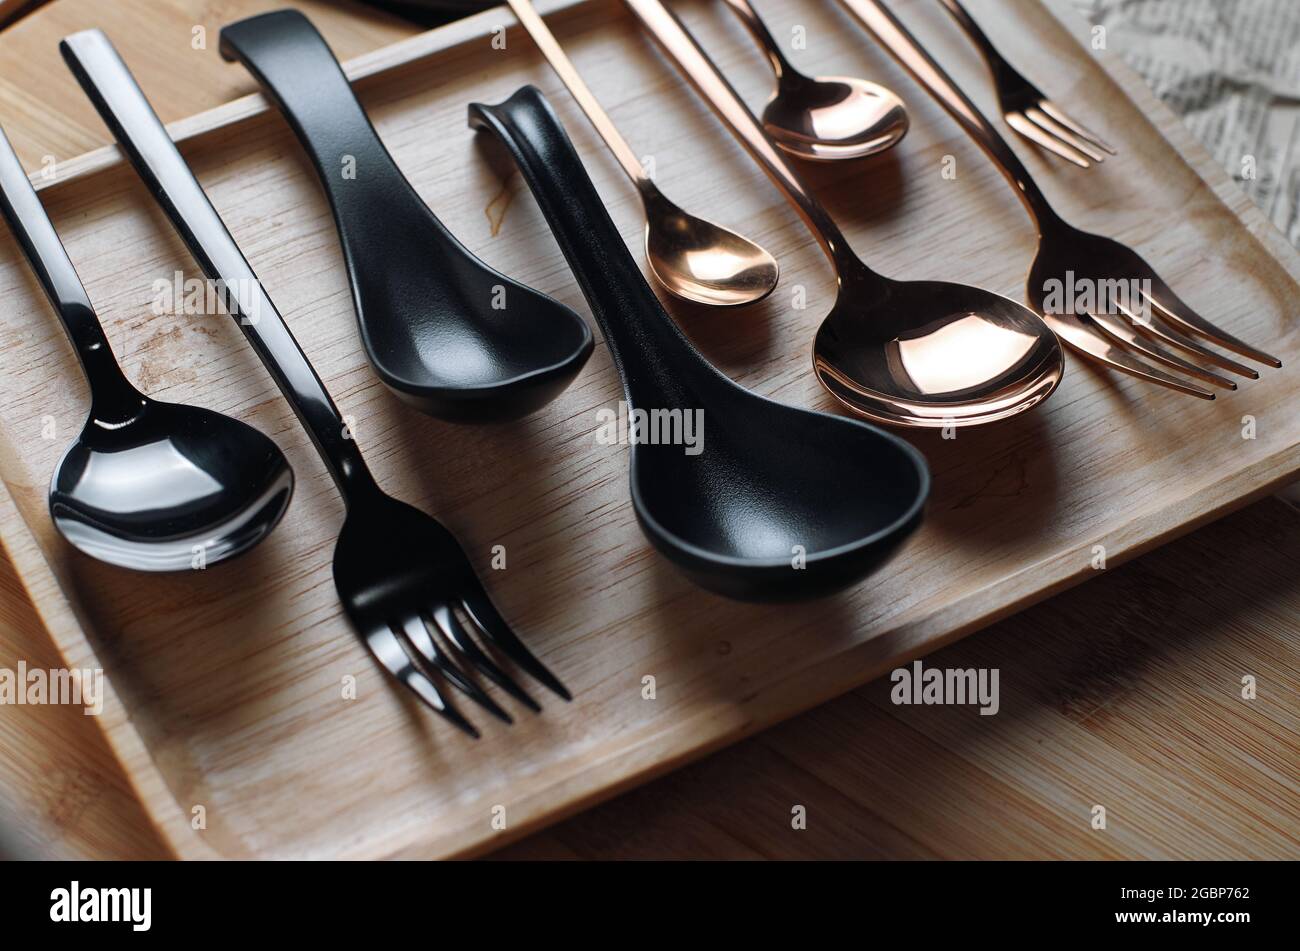 Cutlery is arranged on a wooden tray Stock Photo